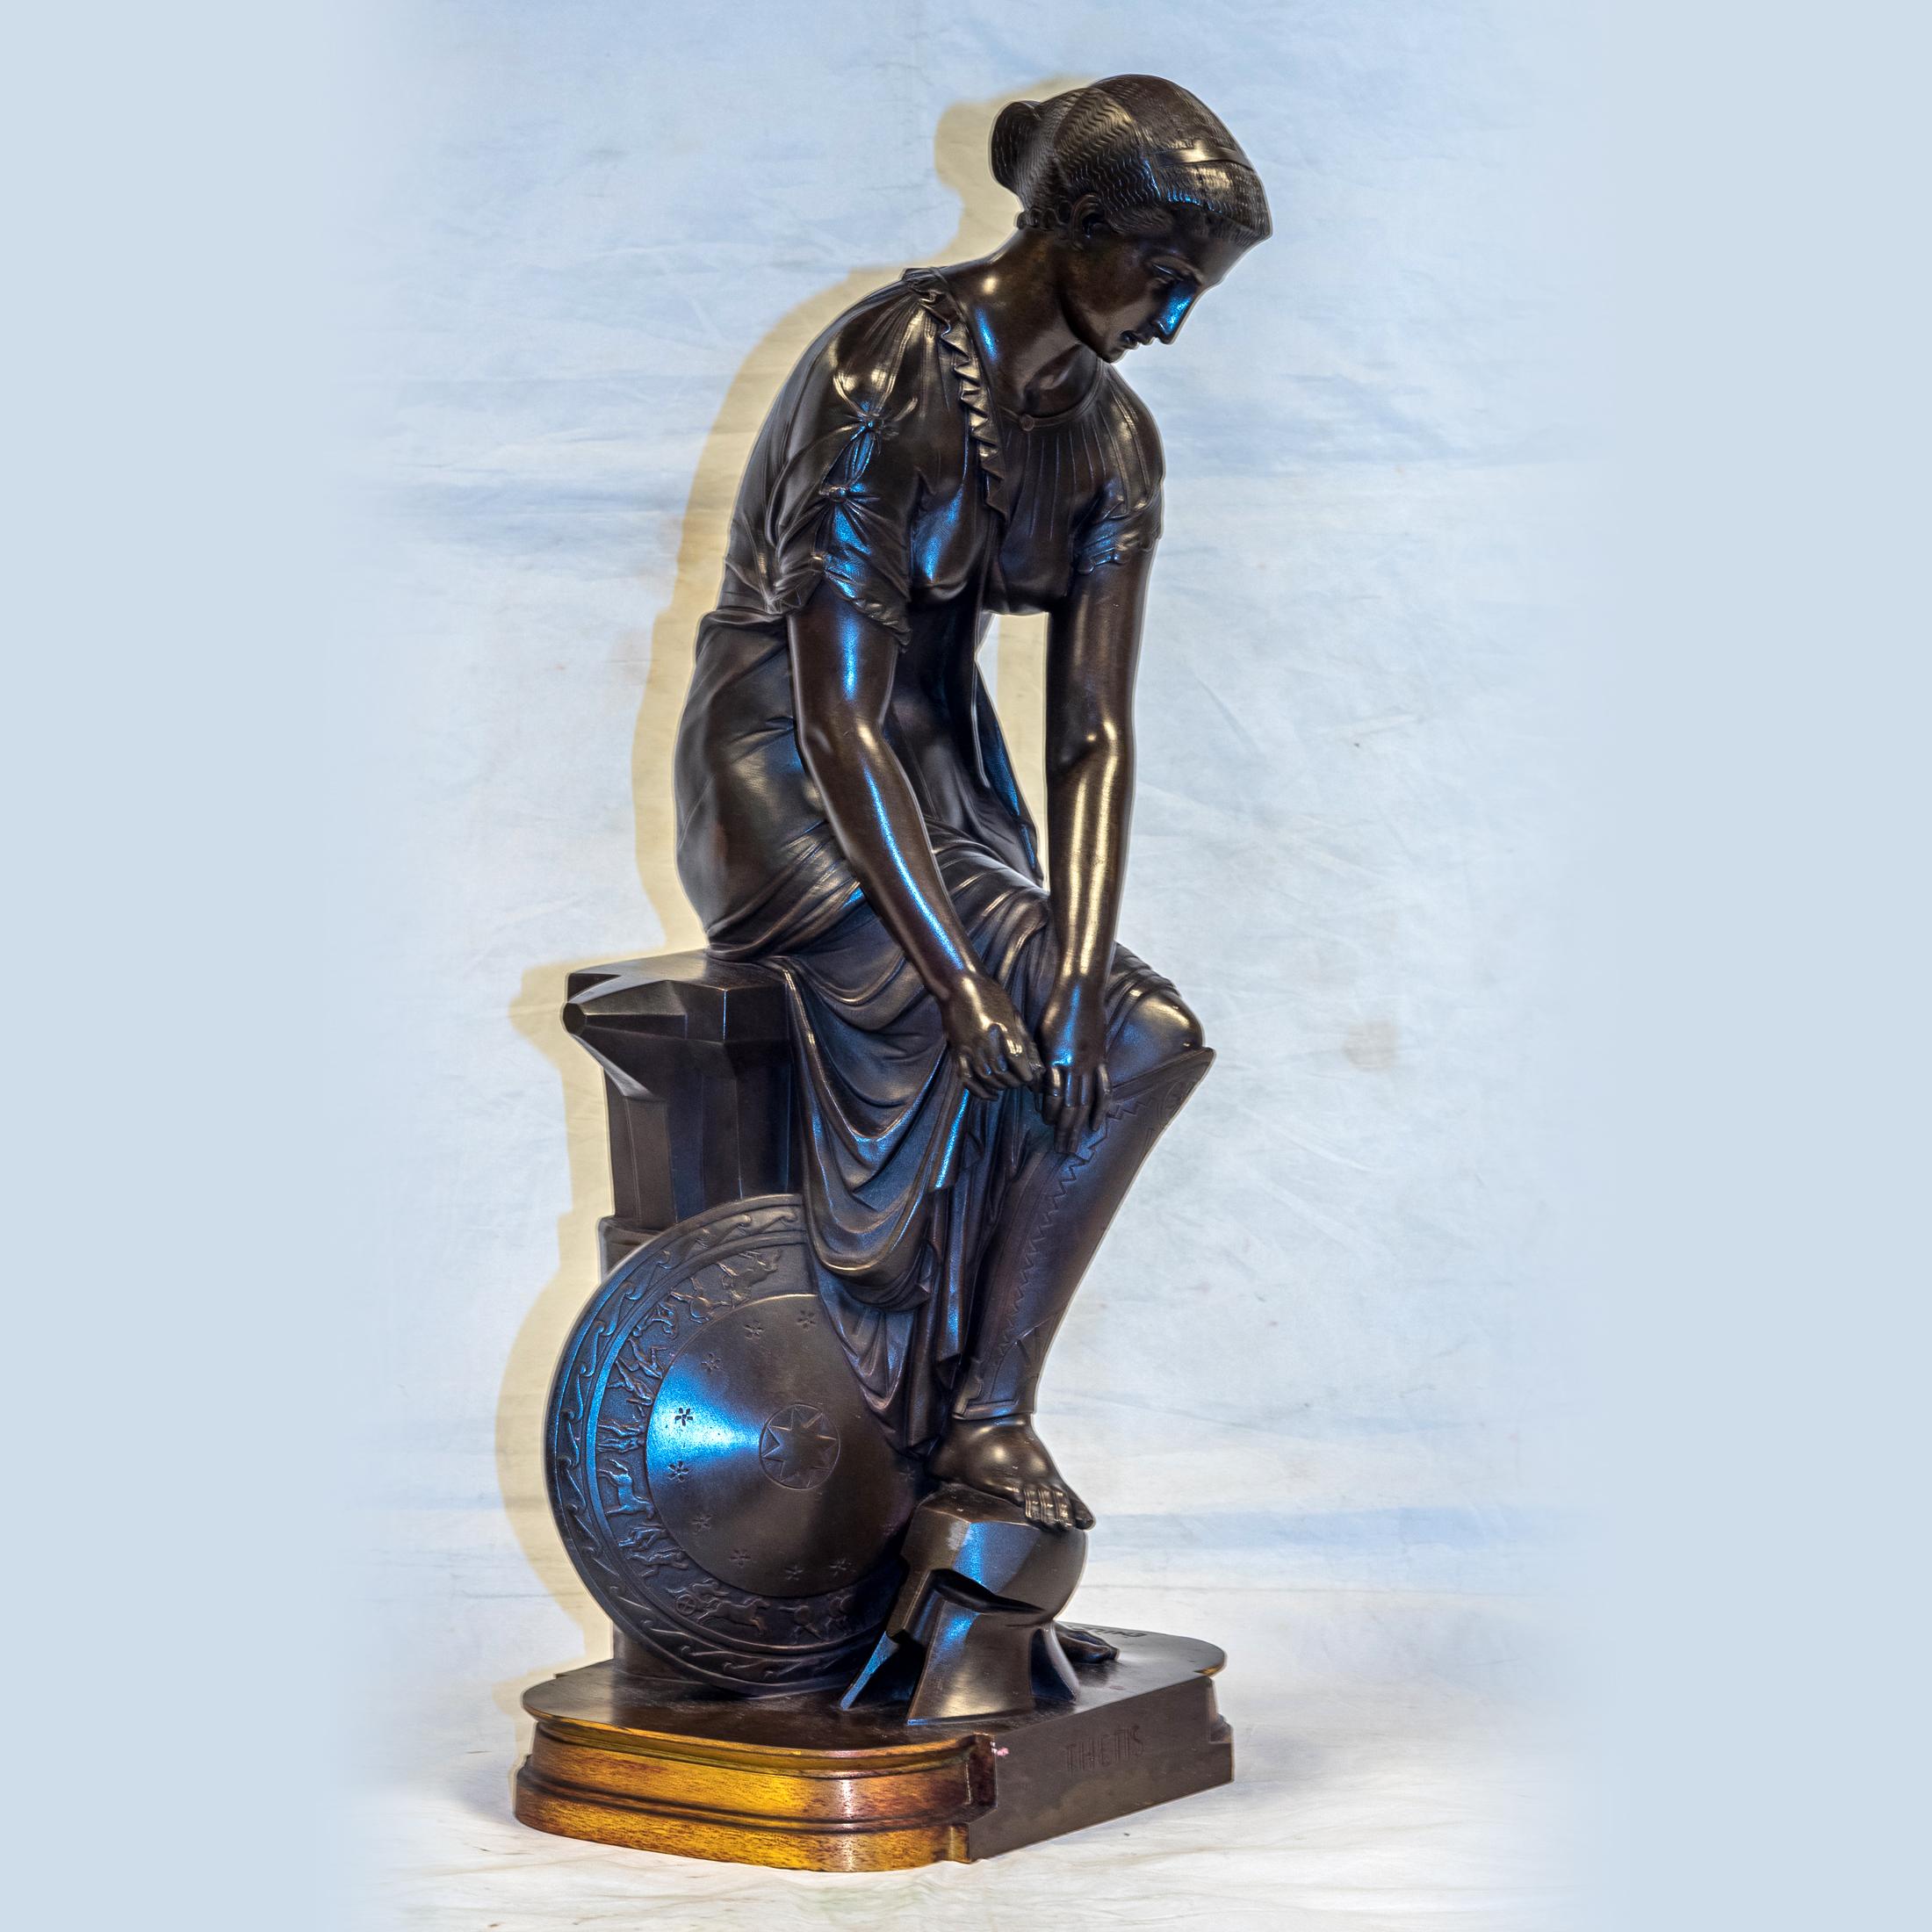 Thetis, goddess of the sea and the leader of the fifty Nereides, mother of Achilles. Signed and foundry mark for Georges Servant.

Artist: Pierre-Eugène-Emile Hébert (1828-1893)
Origin: French
Date: 19th century
Dimension: 19 1/2 x 8 x 8 1/2